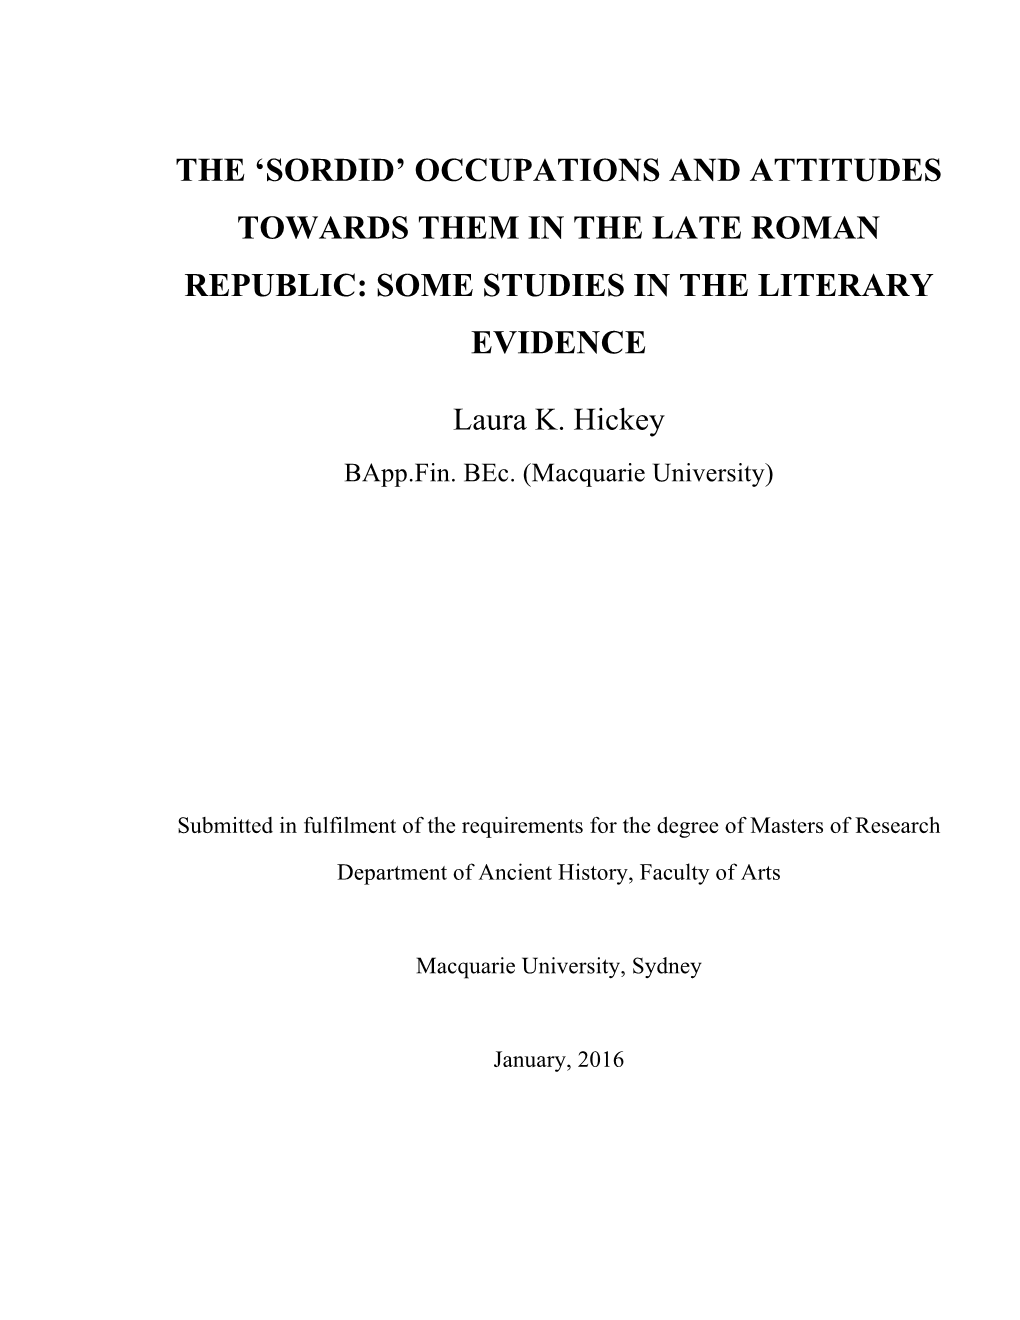 Occupations and Attitudes Towards Them in the Late Roman Republic: Some Studies in the Literary Evidence